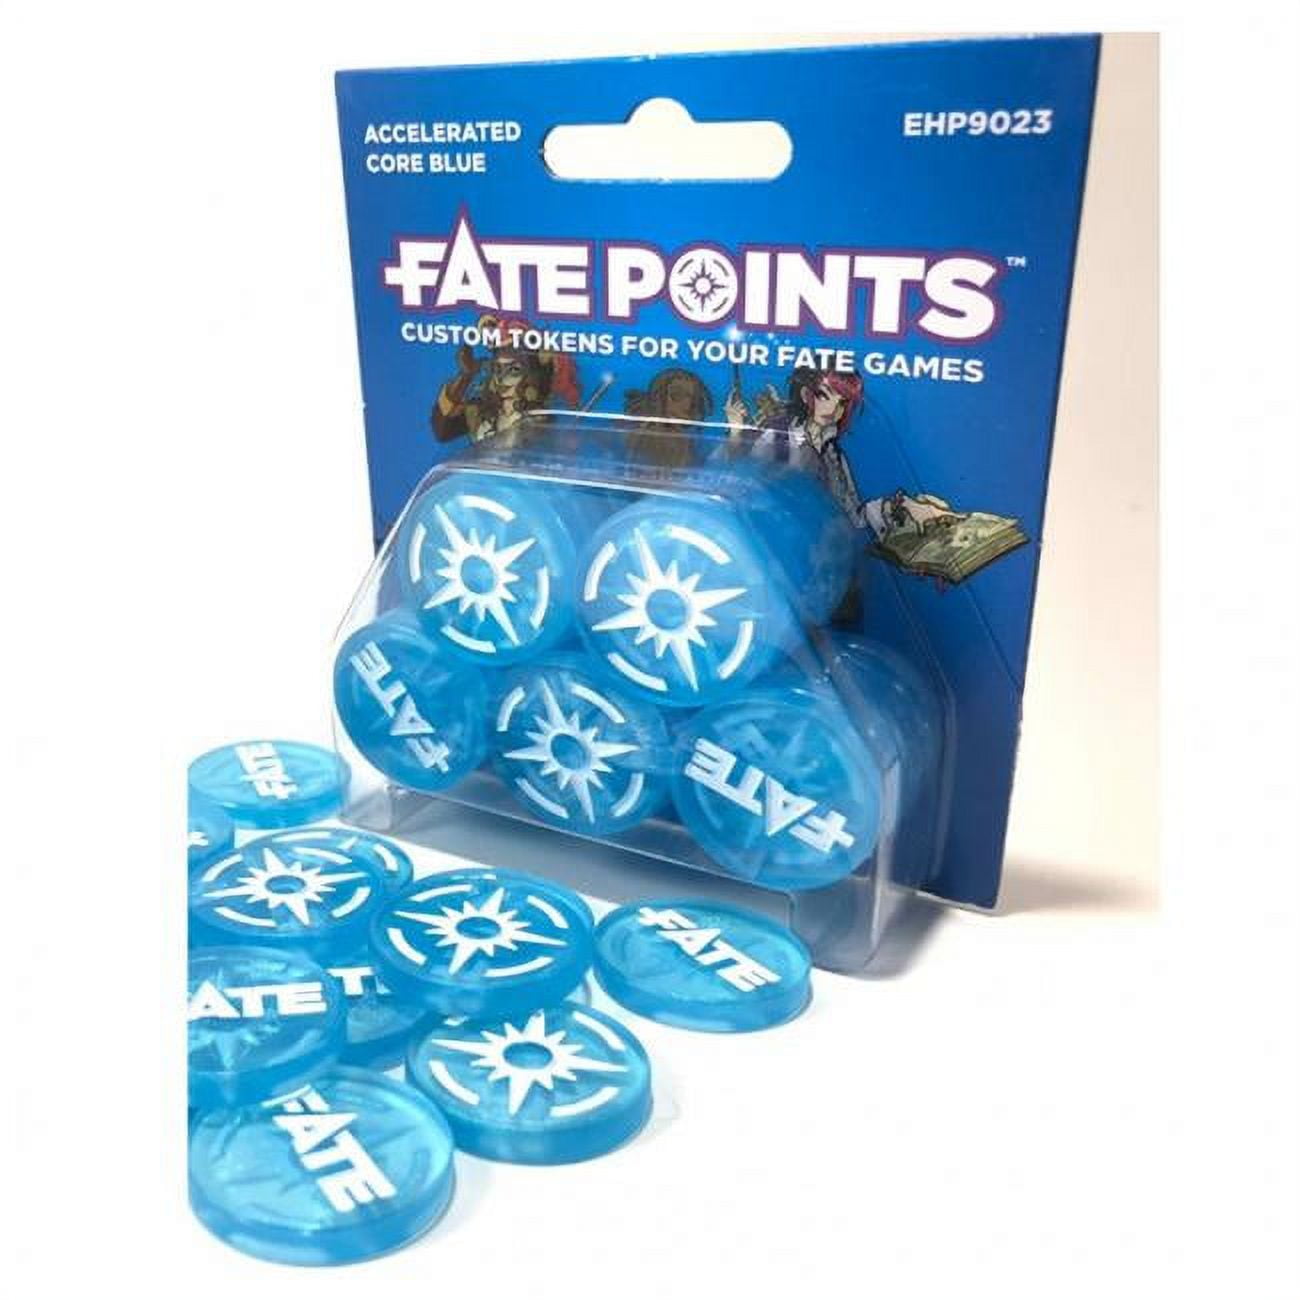 Ehp9023 Fate Points Accelerated Role Playing Games - Core Blue